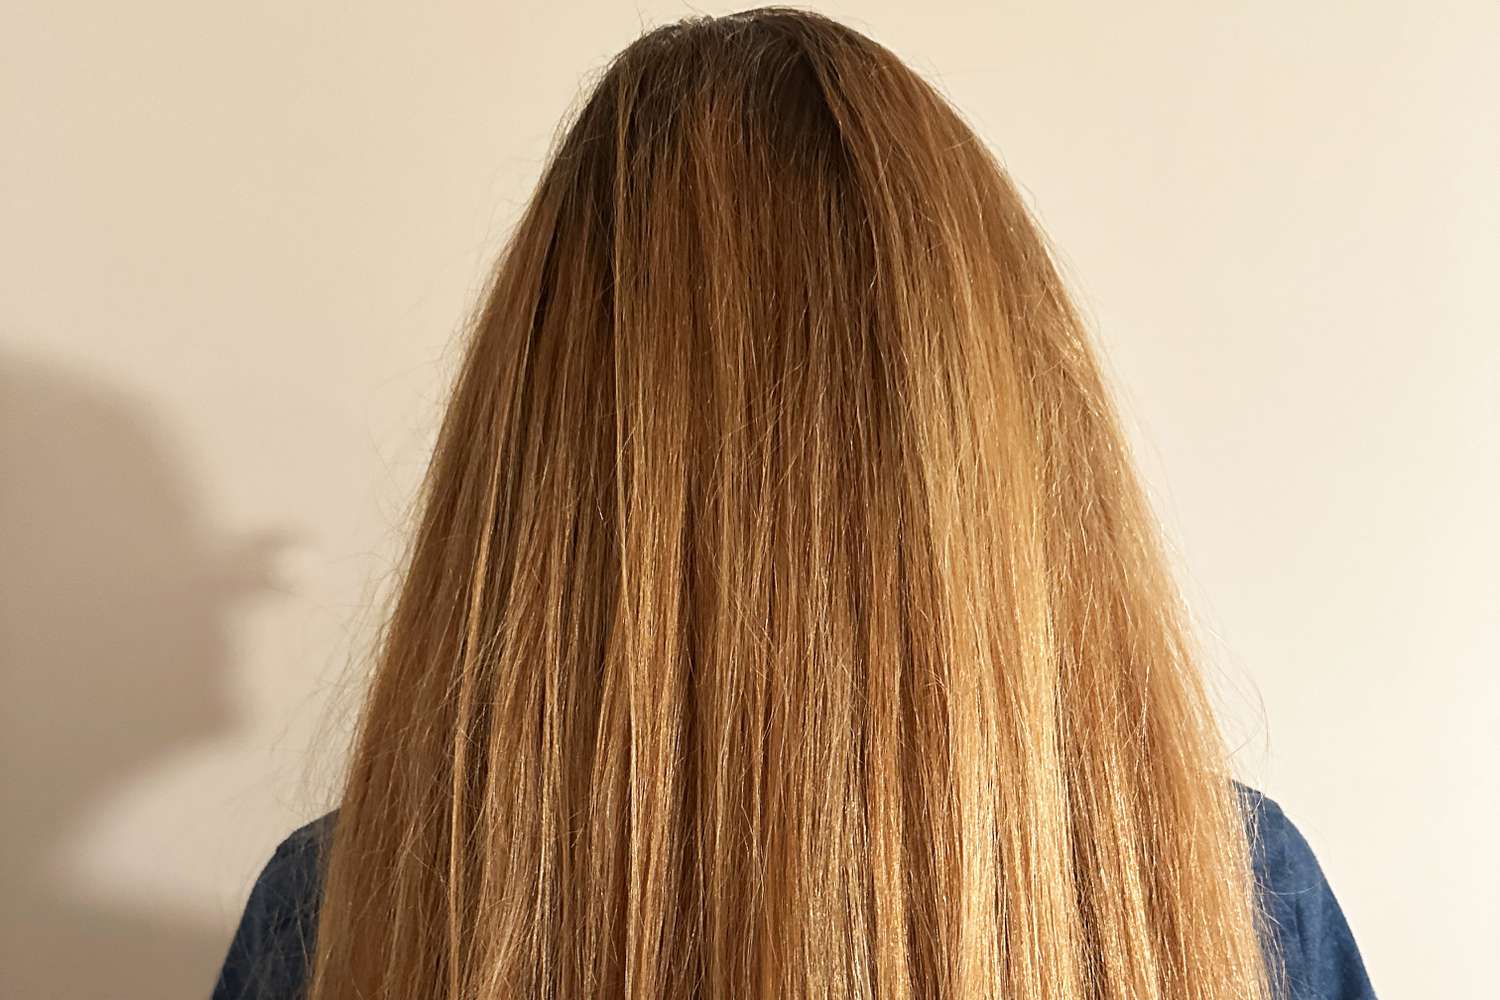 A person's hair after using KÃ©rastase Nutritive Bain Satin Riche Shampoo and Conditioner